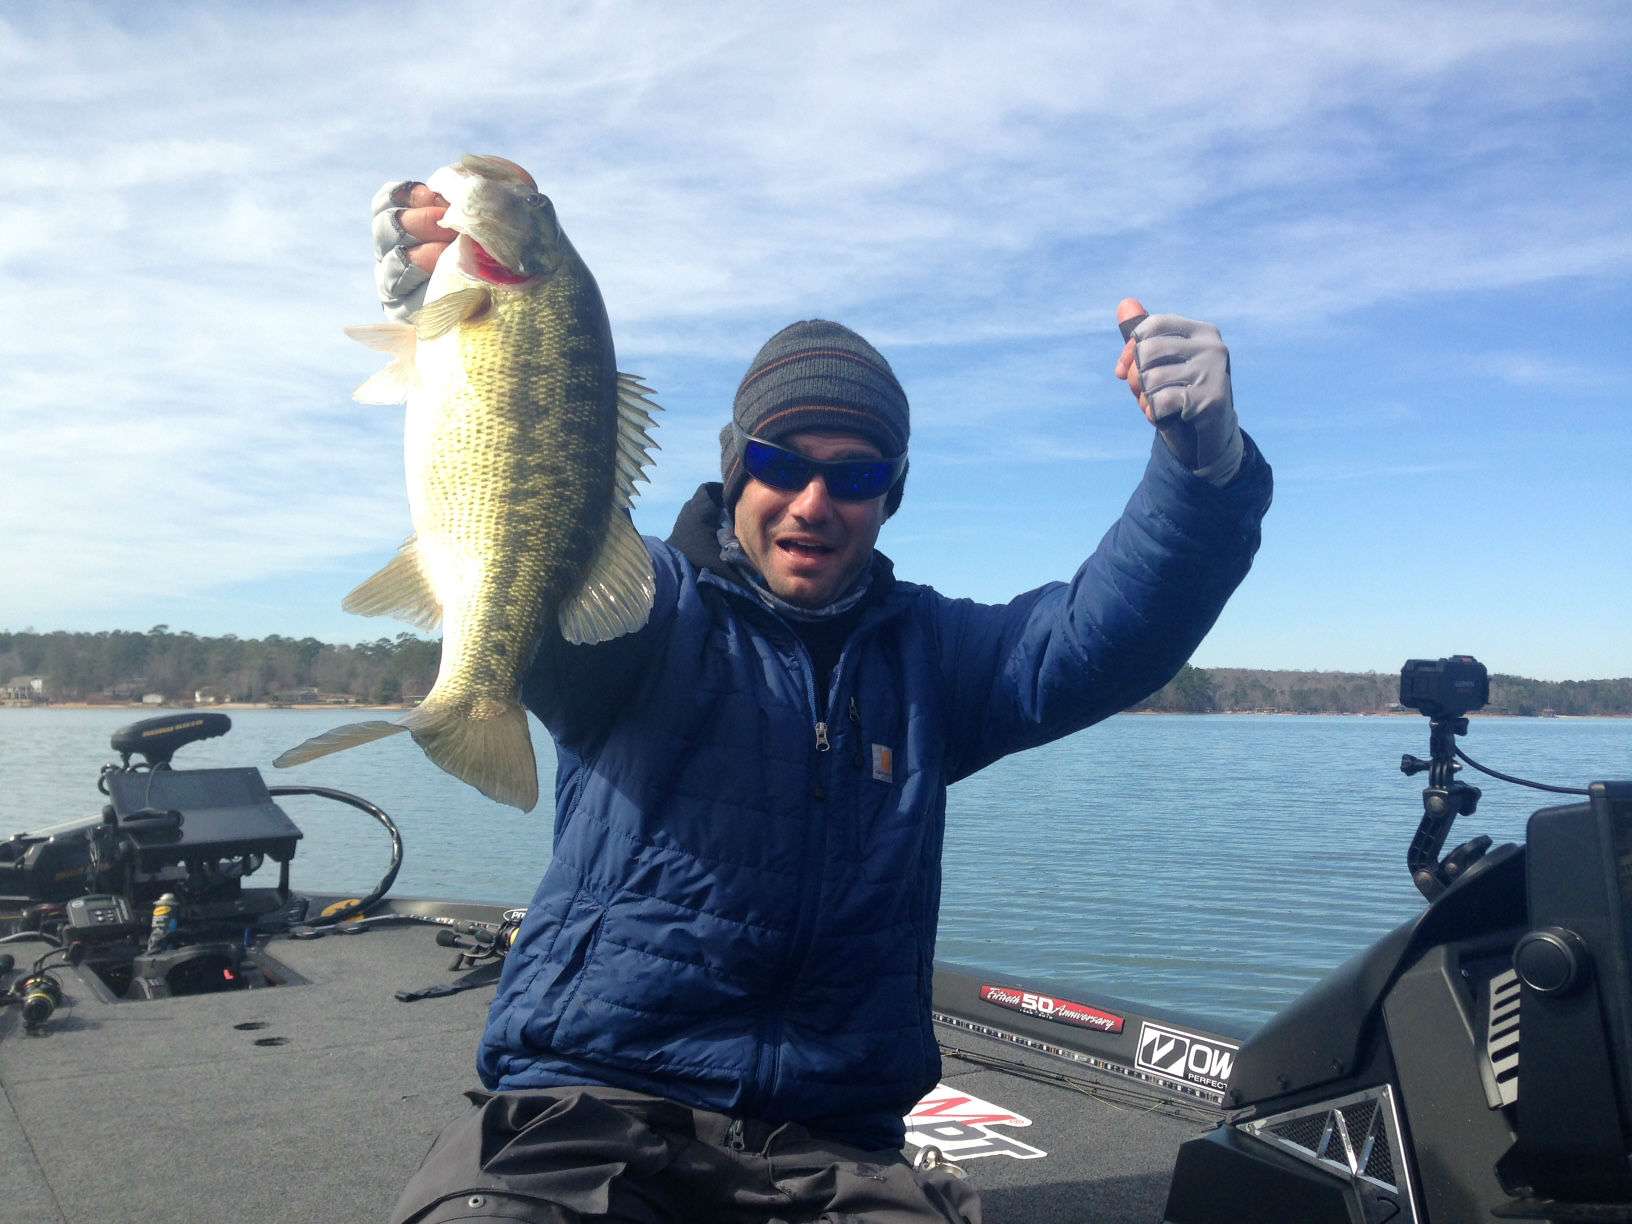 Matt Lee just landed another good spotted bass weighing in at 2lb 10oz.